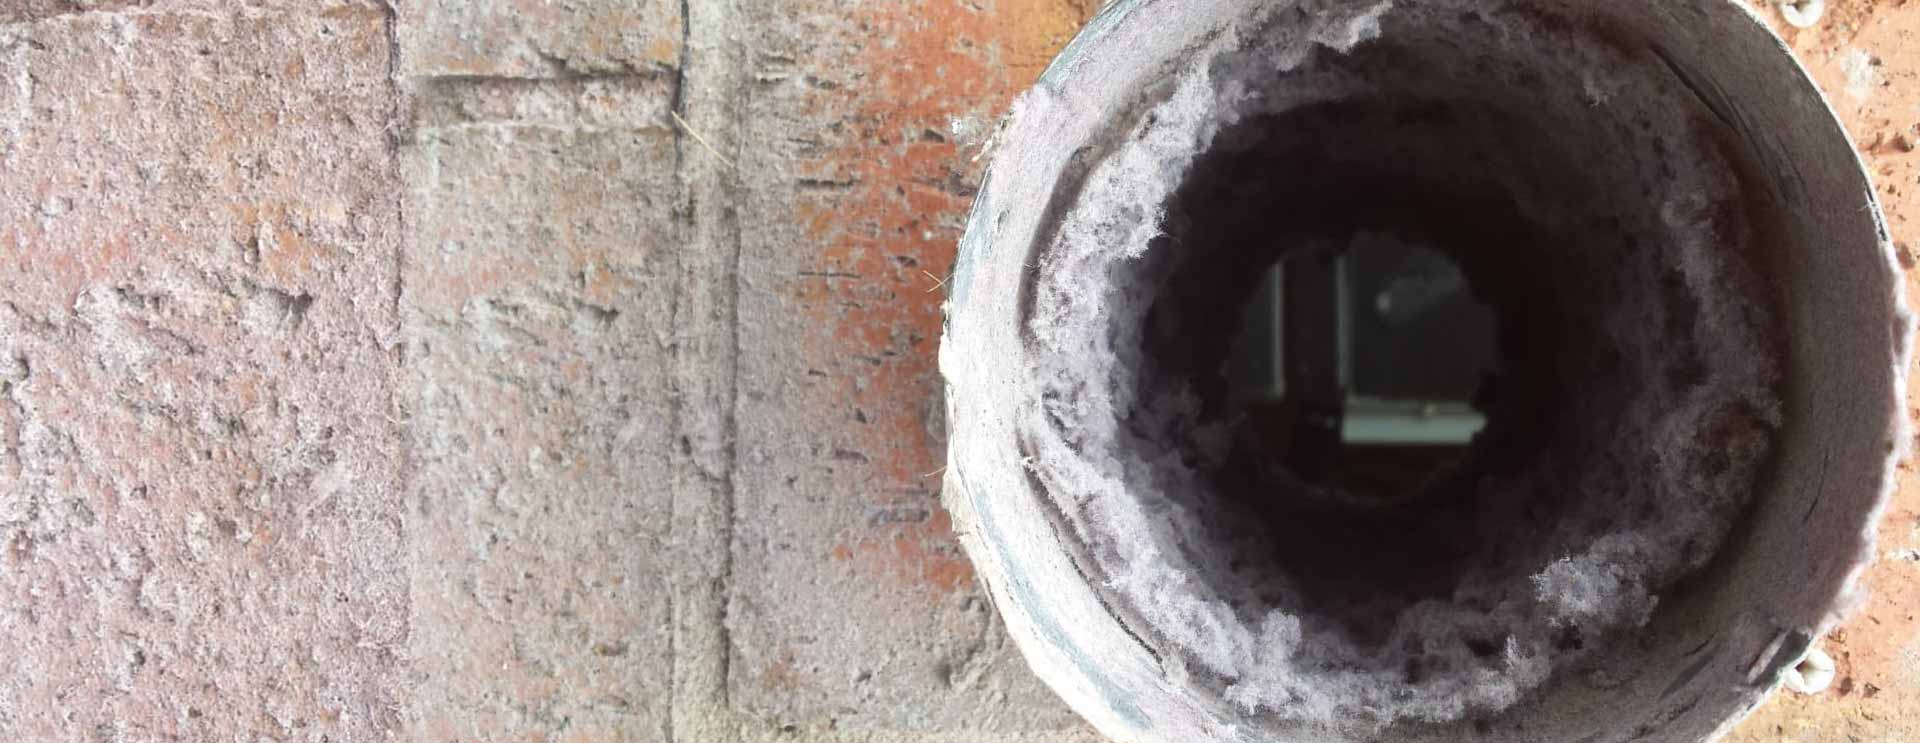 Duct Cleaning to remove lint from commercial washing machine pipes